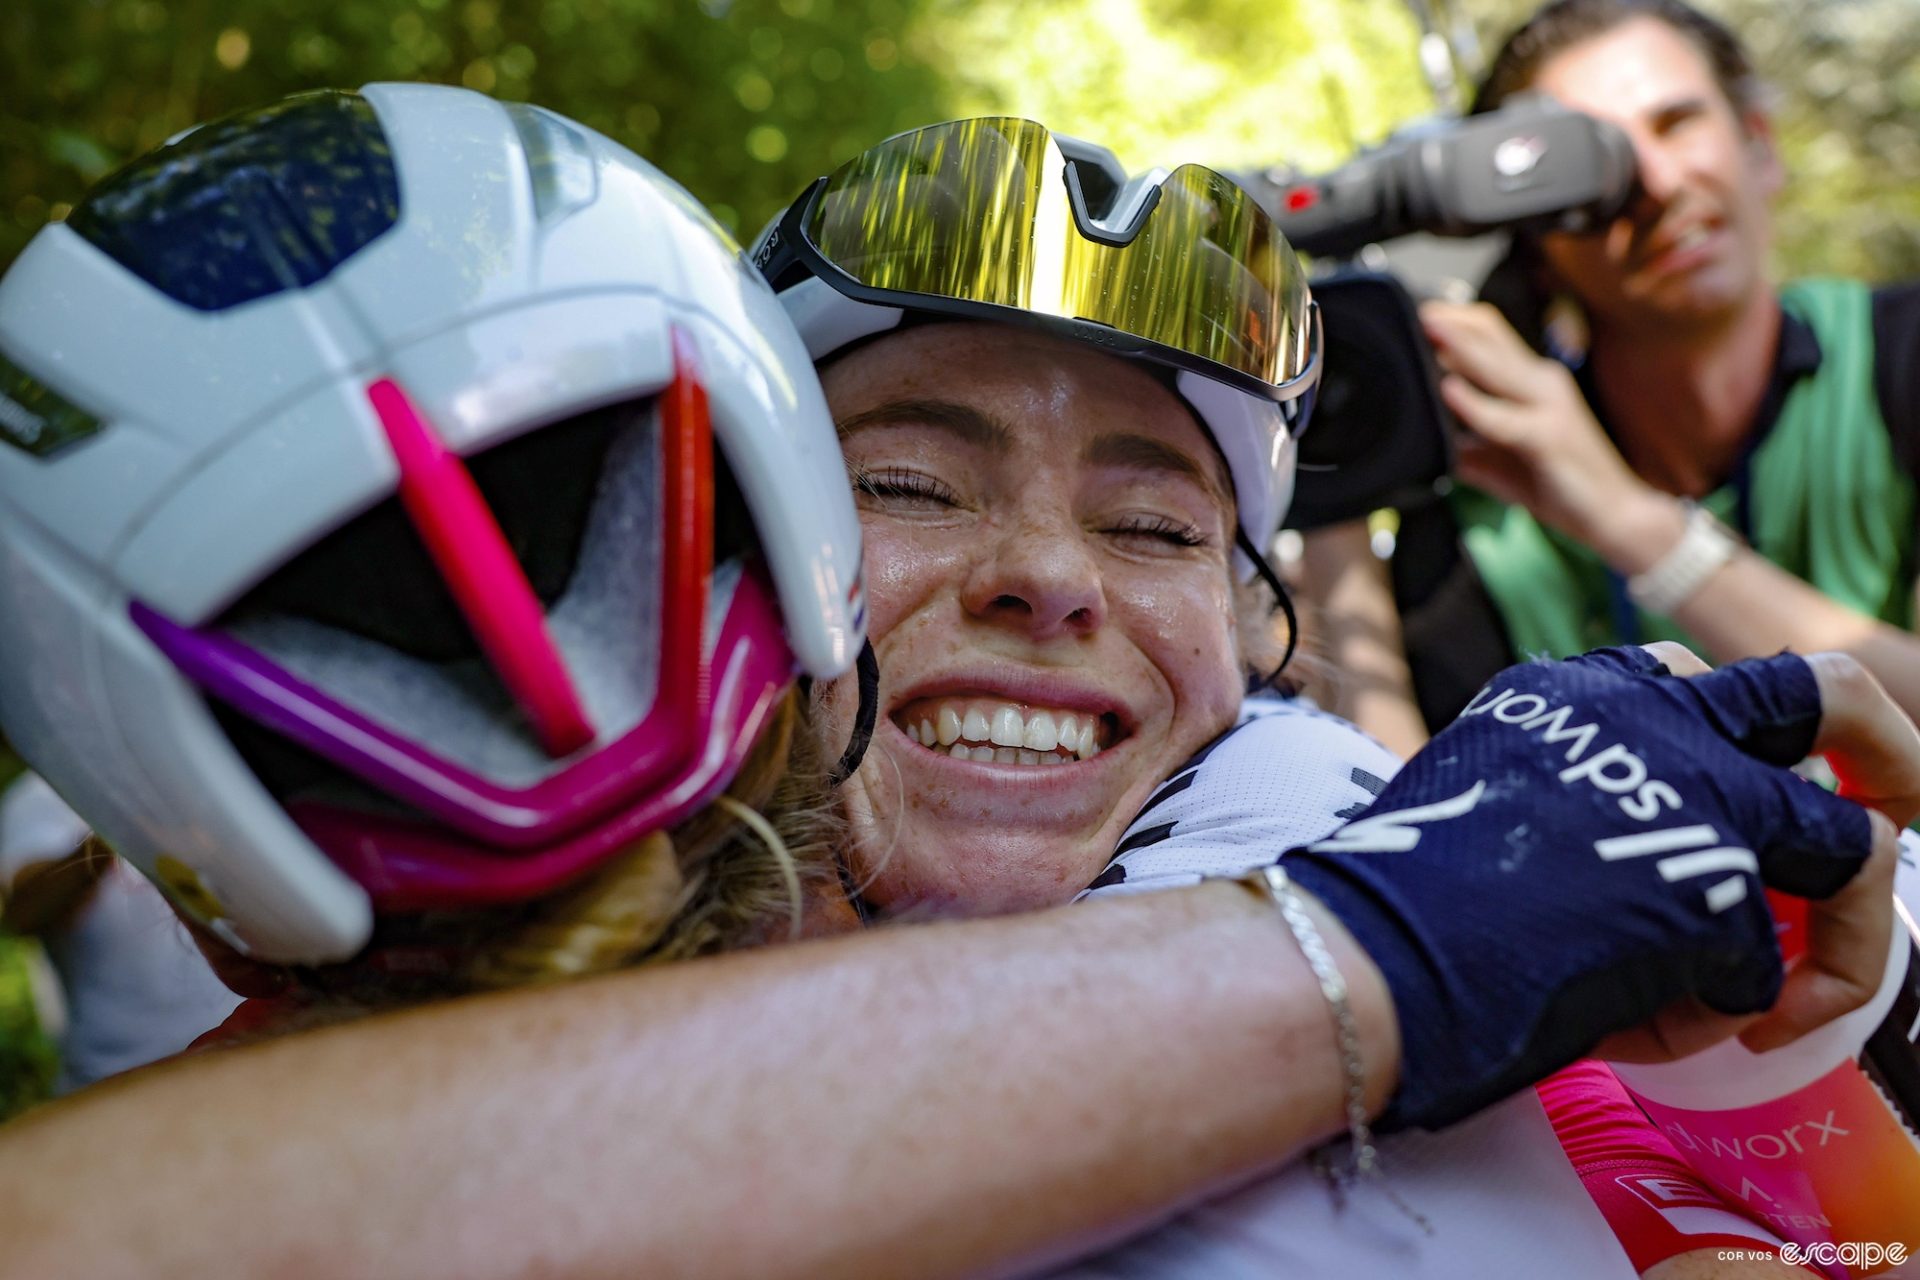 Demi Vollering embraces Lorena Wiebes after a bike race